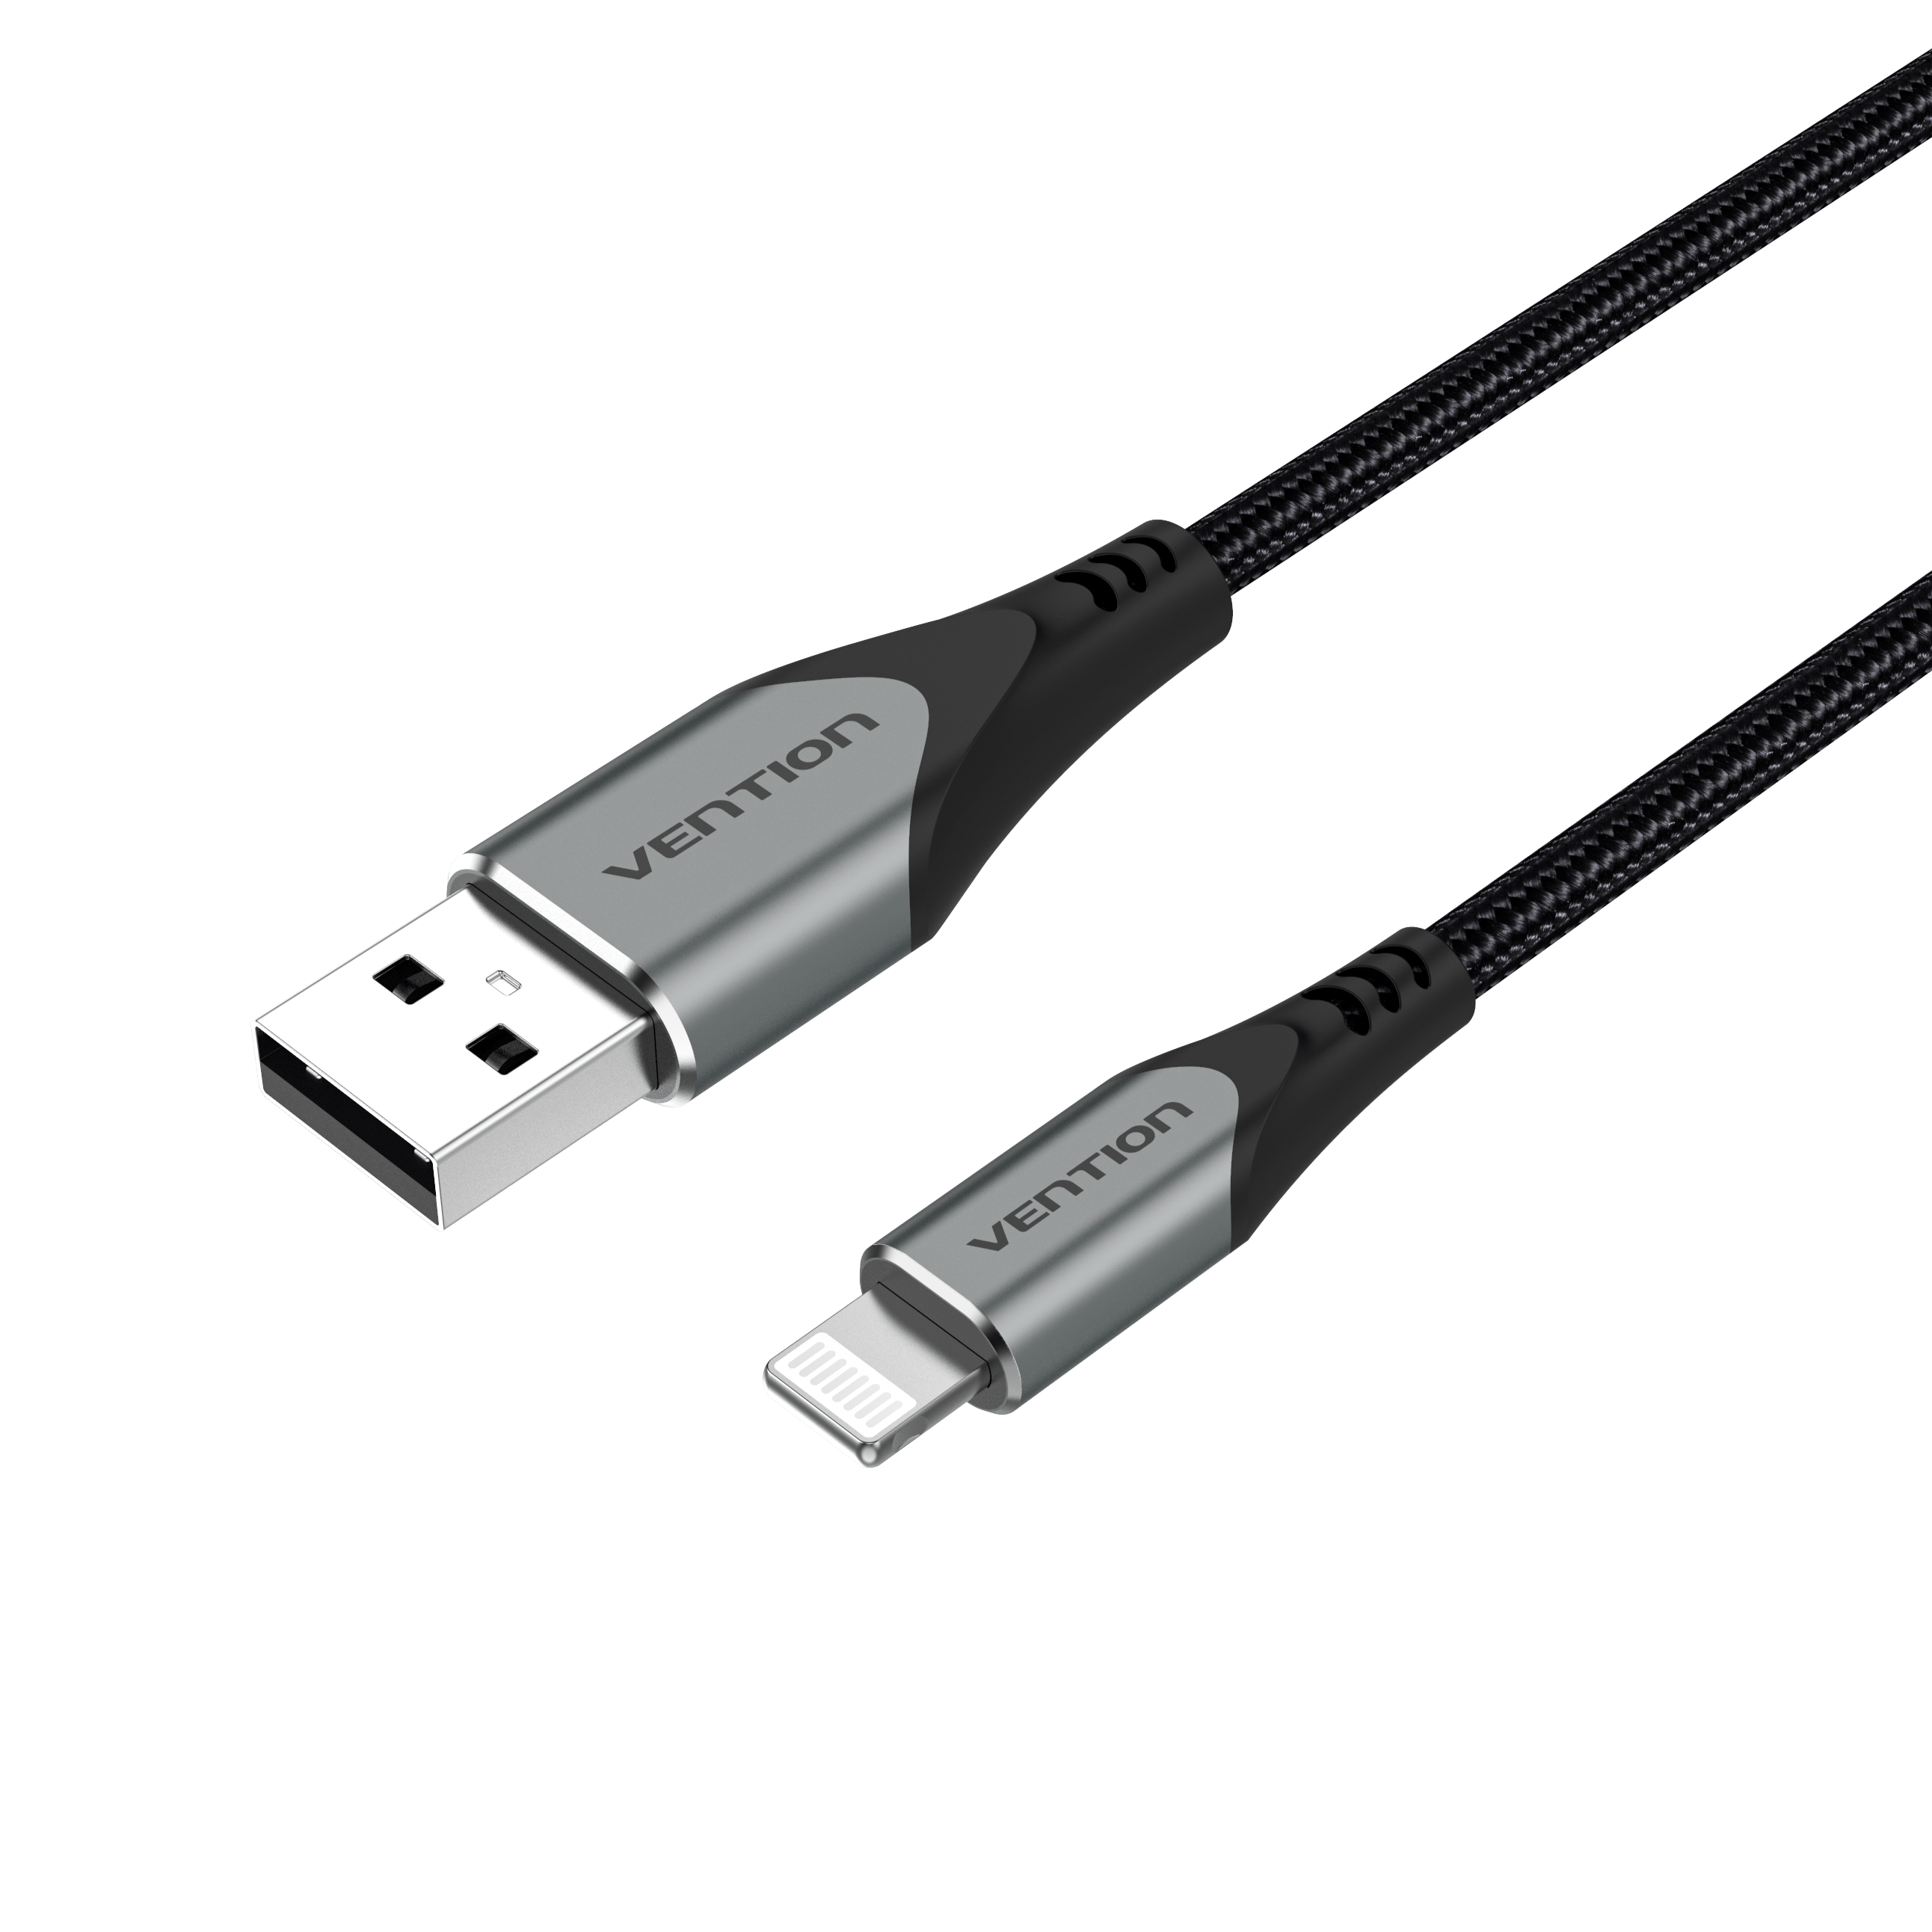 Turbine Bermad fængelsflugt MFi USB Cable for iPhone 12 Max 11 Xs X 8 Plus USB Charge for iPhone 1